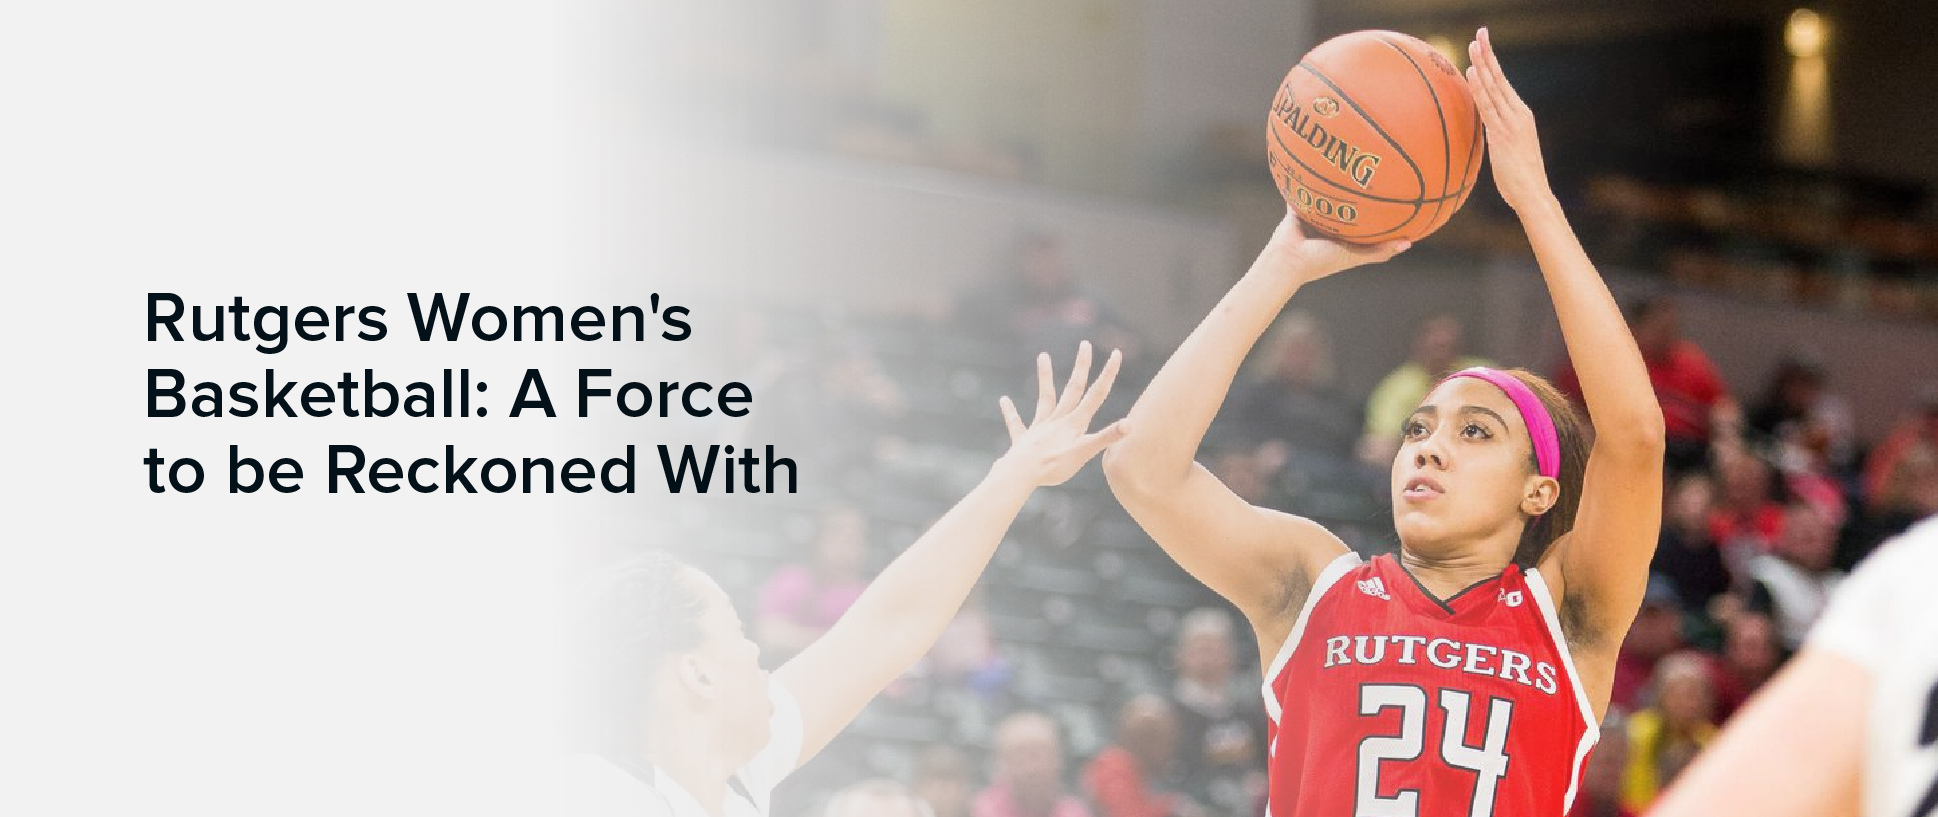 Rutgers Women’s Basketball: A Force to be Reckoned With